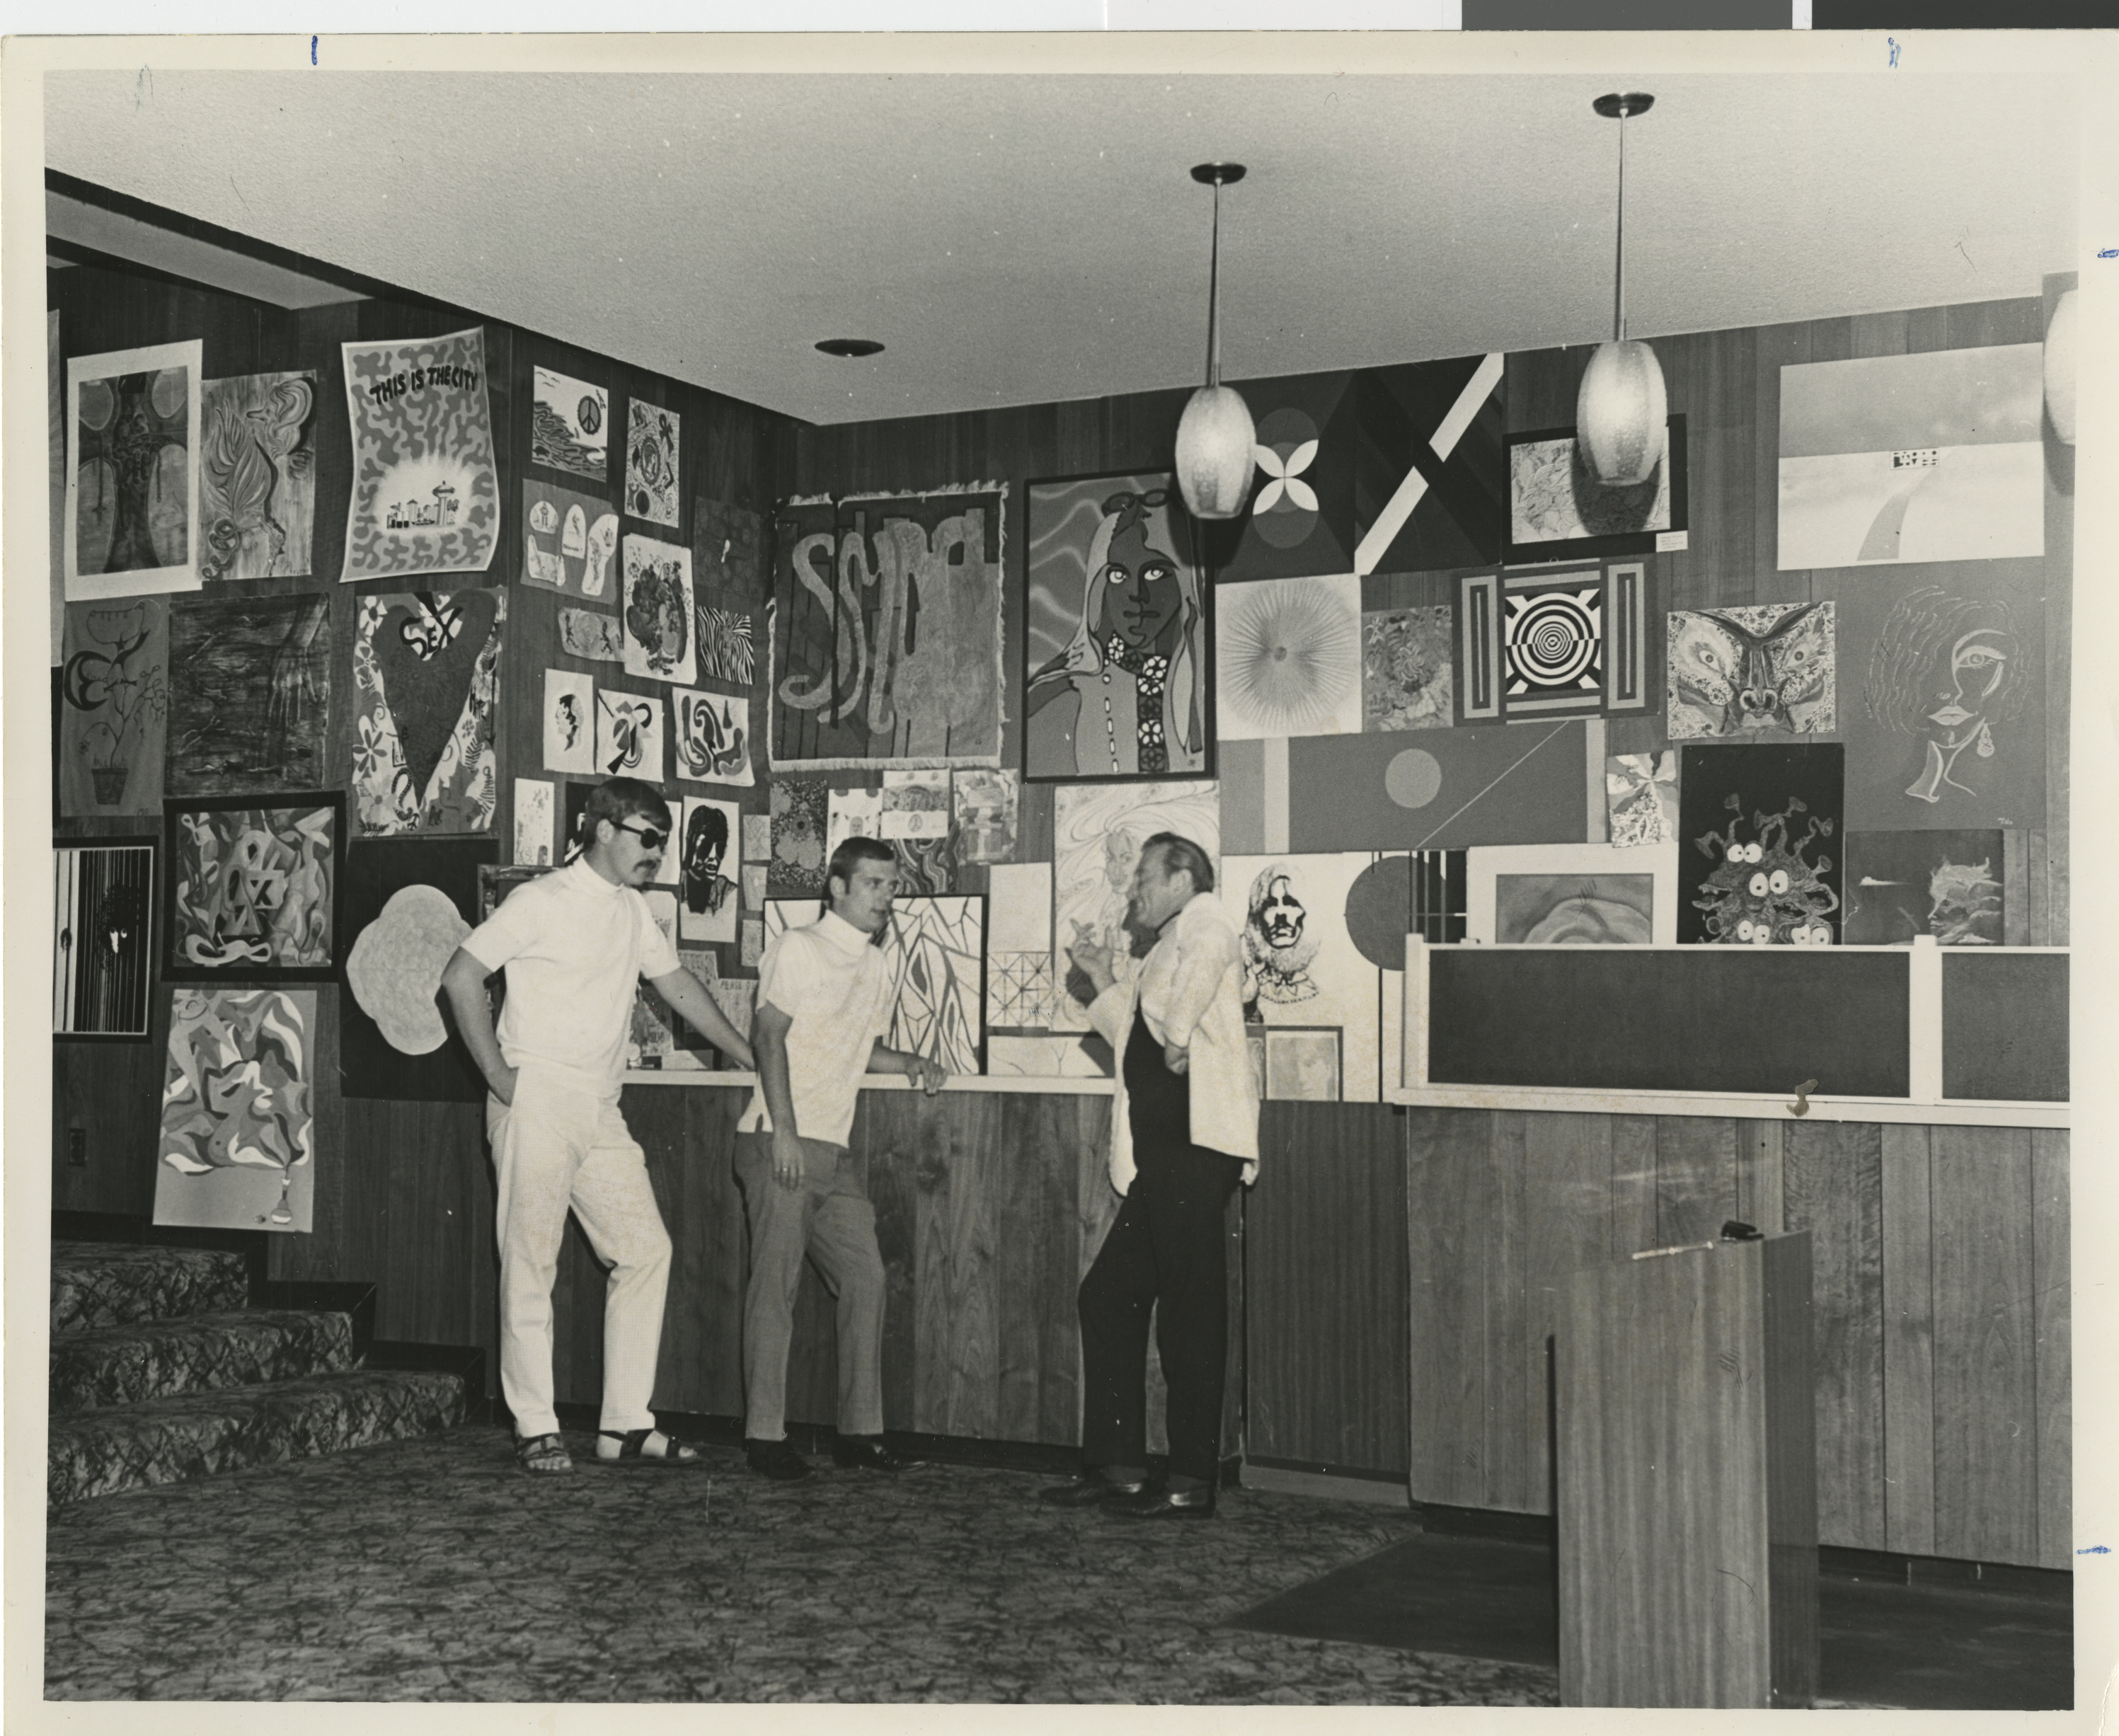 Photograph of interior lobby area of Huntridge Theater with art contest entries, 1968